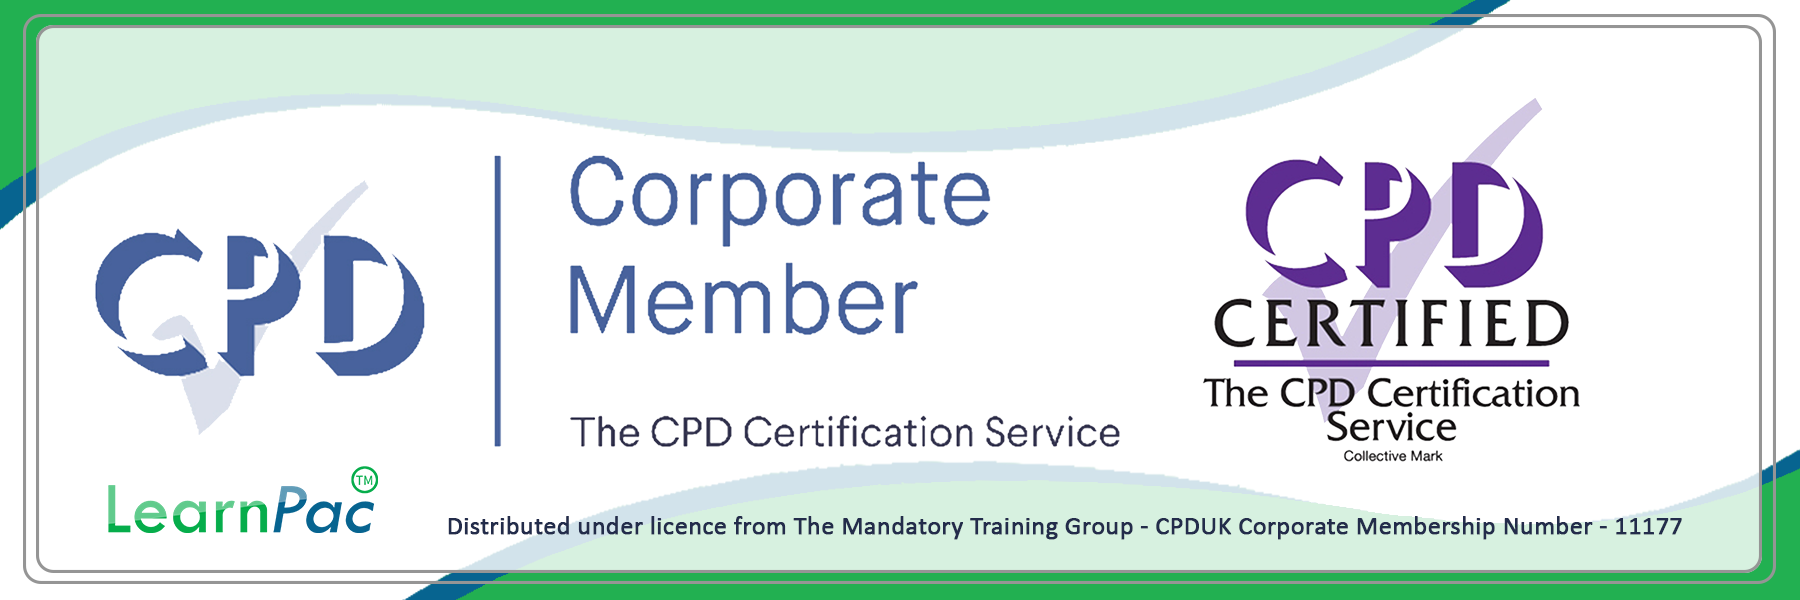 Adult Learning – Mental Skills - Online Training Course - CPD Accredited - LearnPac Systems UK -